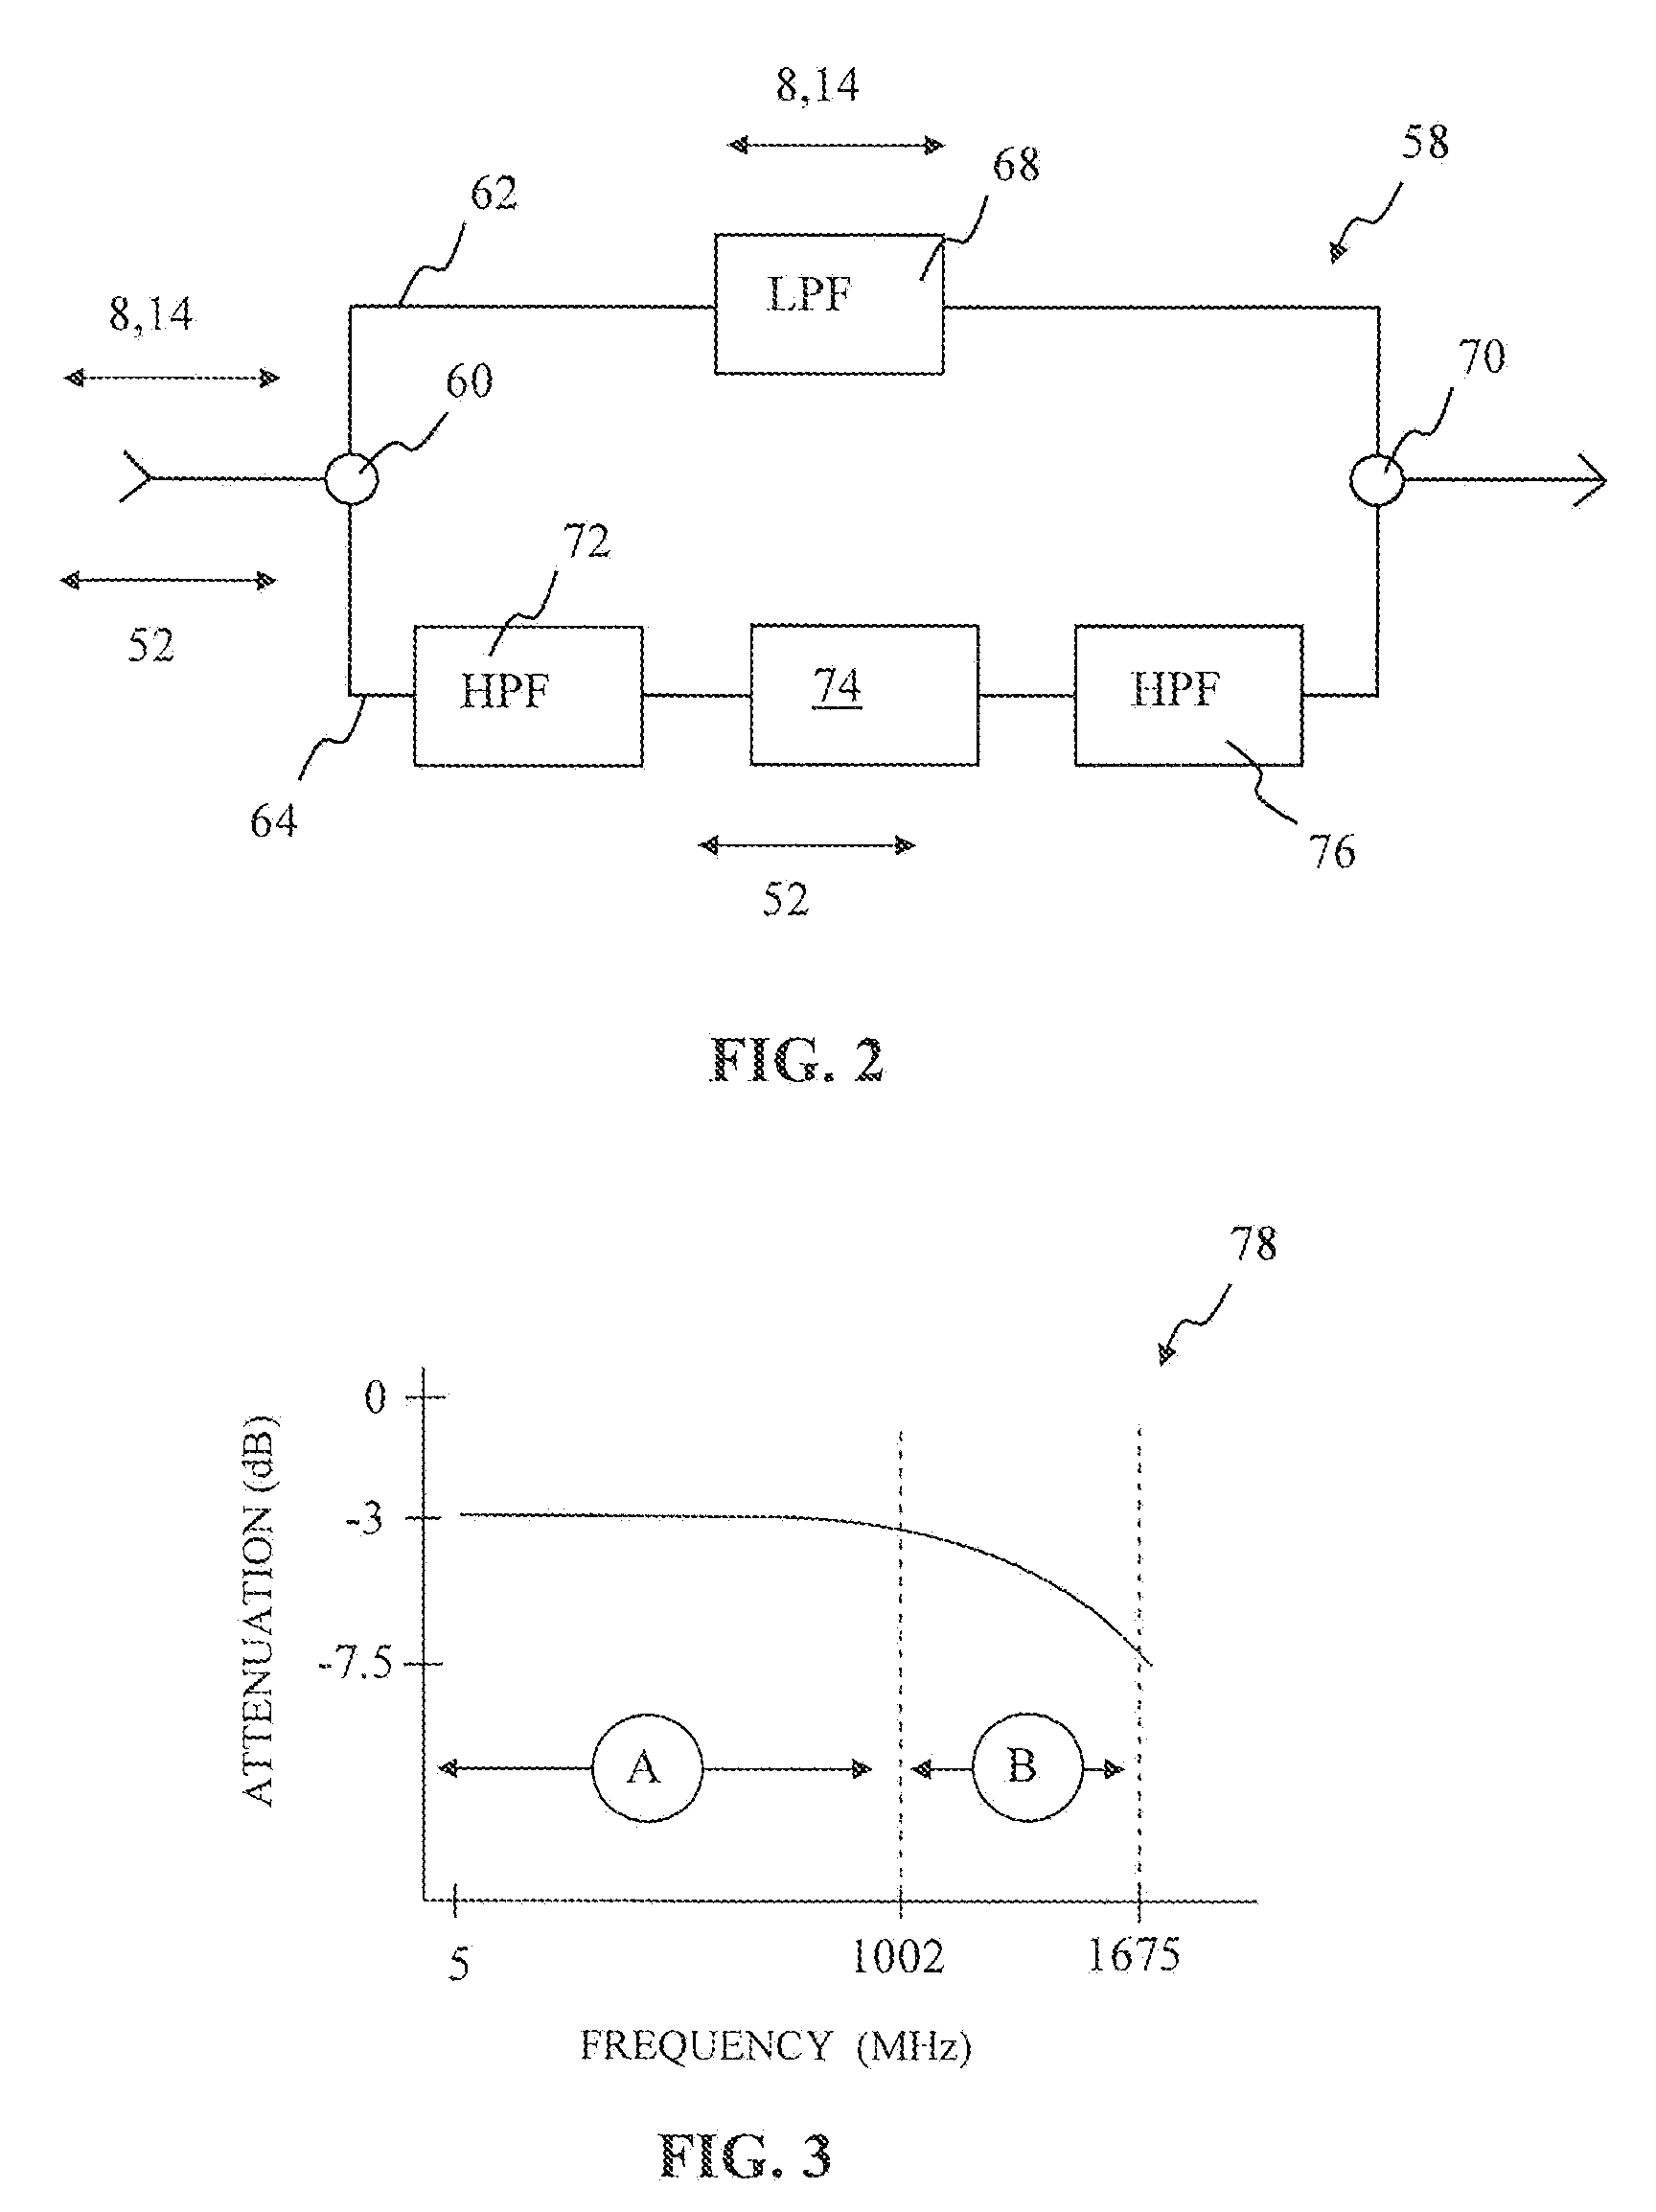 Home network frequency conditioning device and method